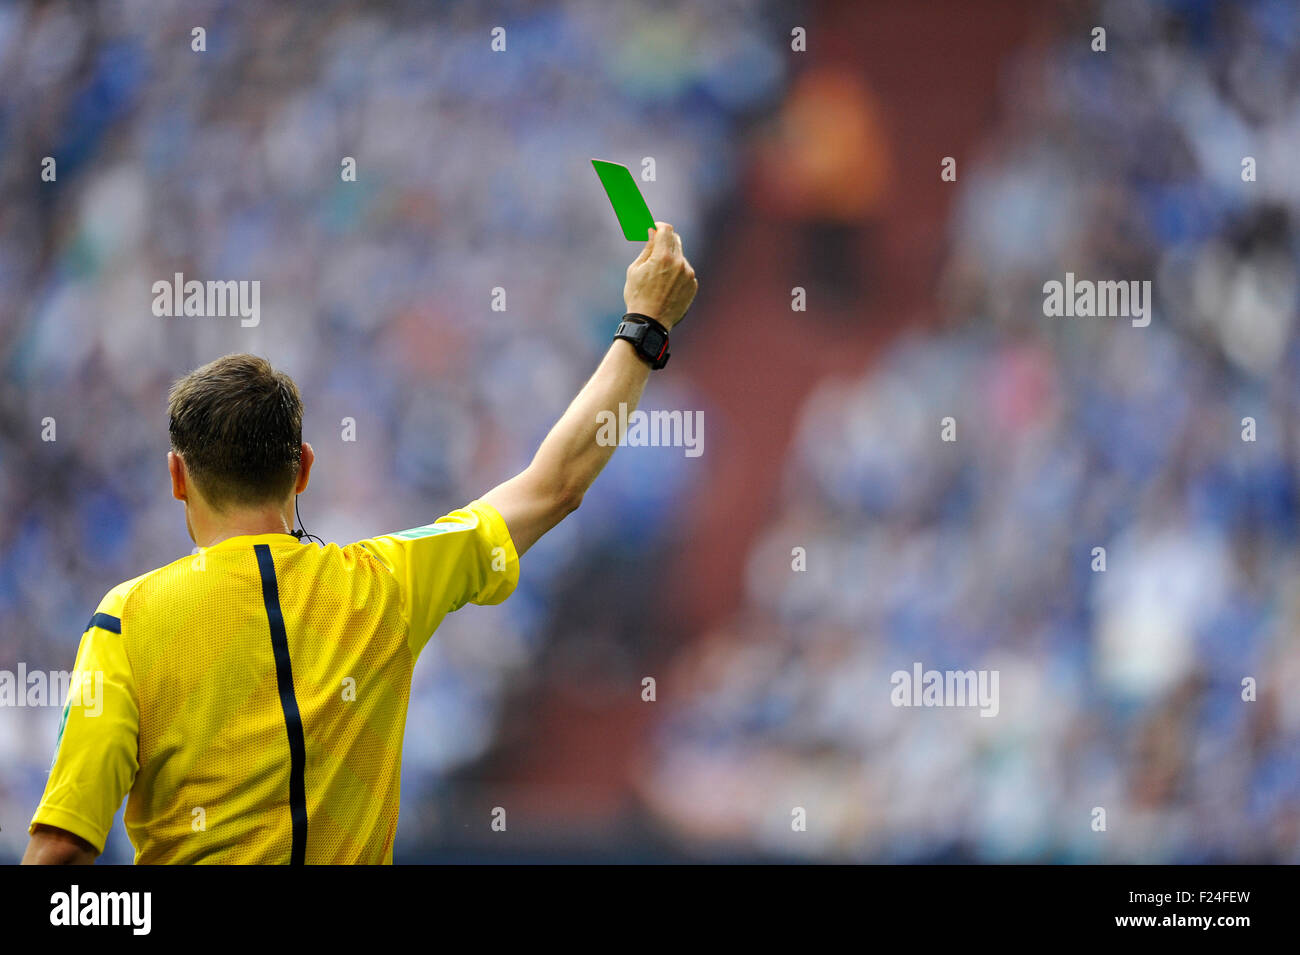 German football referee Markus Schmidt shows the green card. Stock Photo